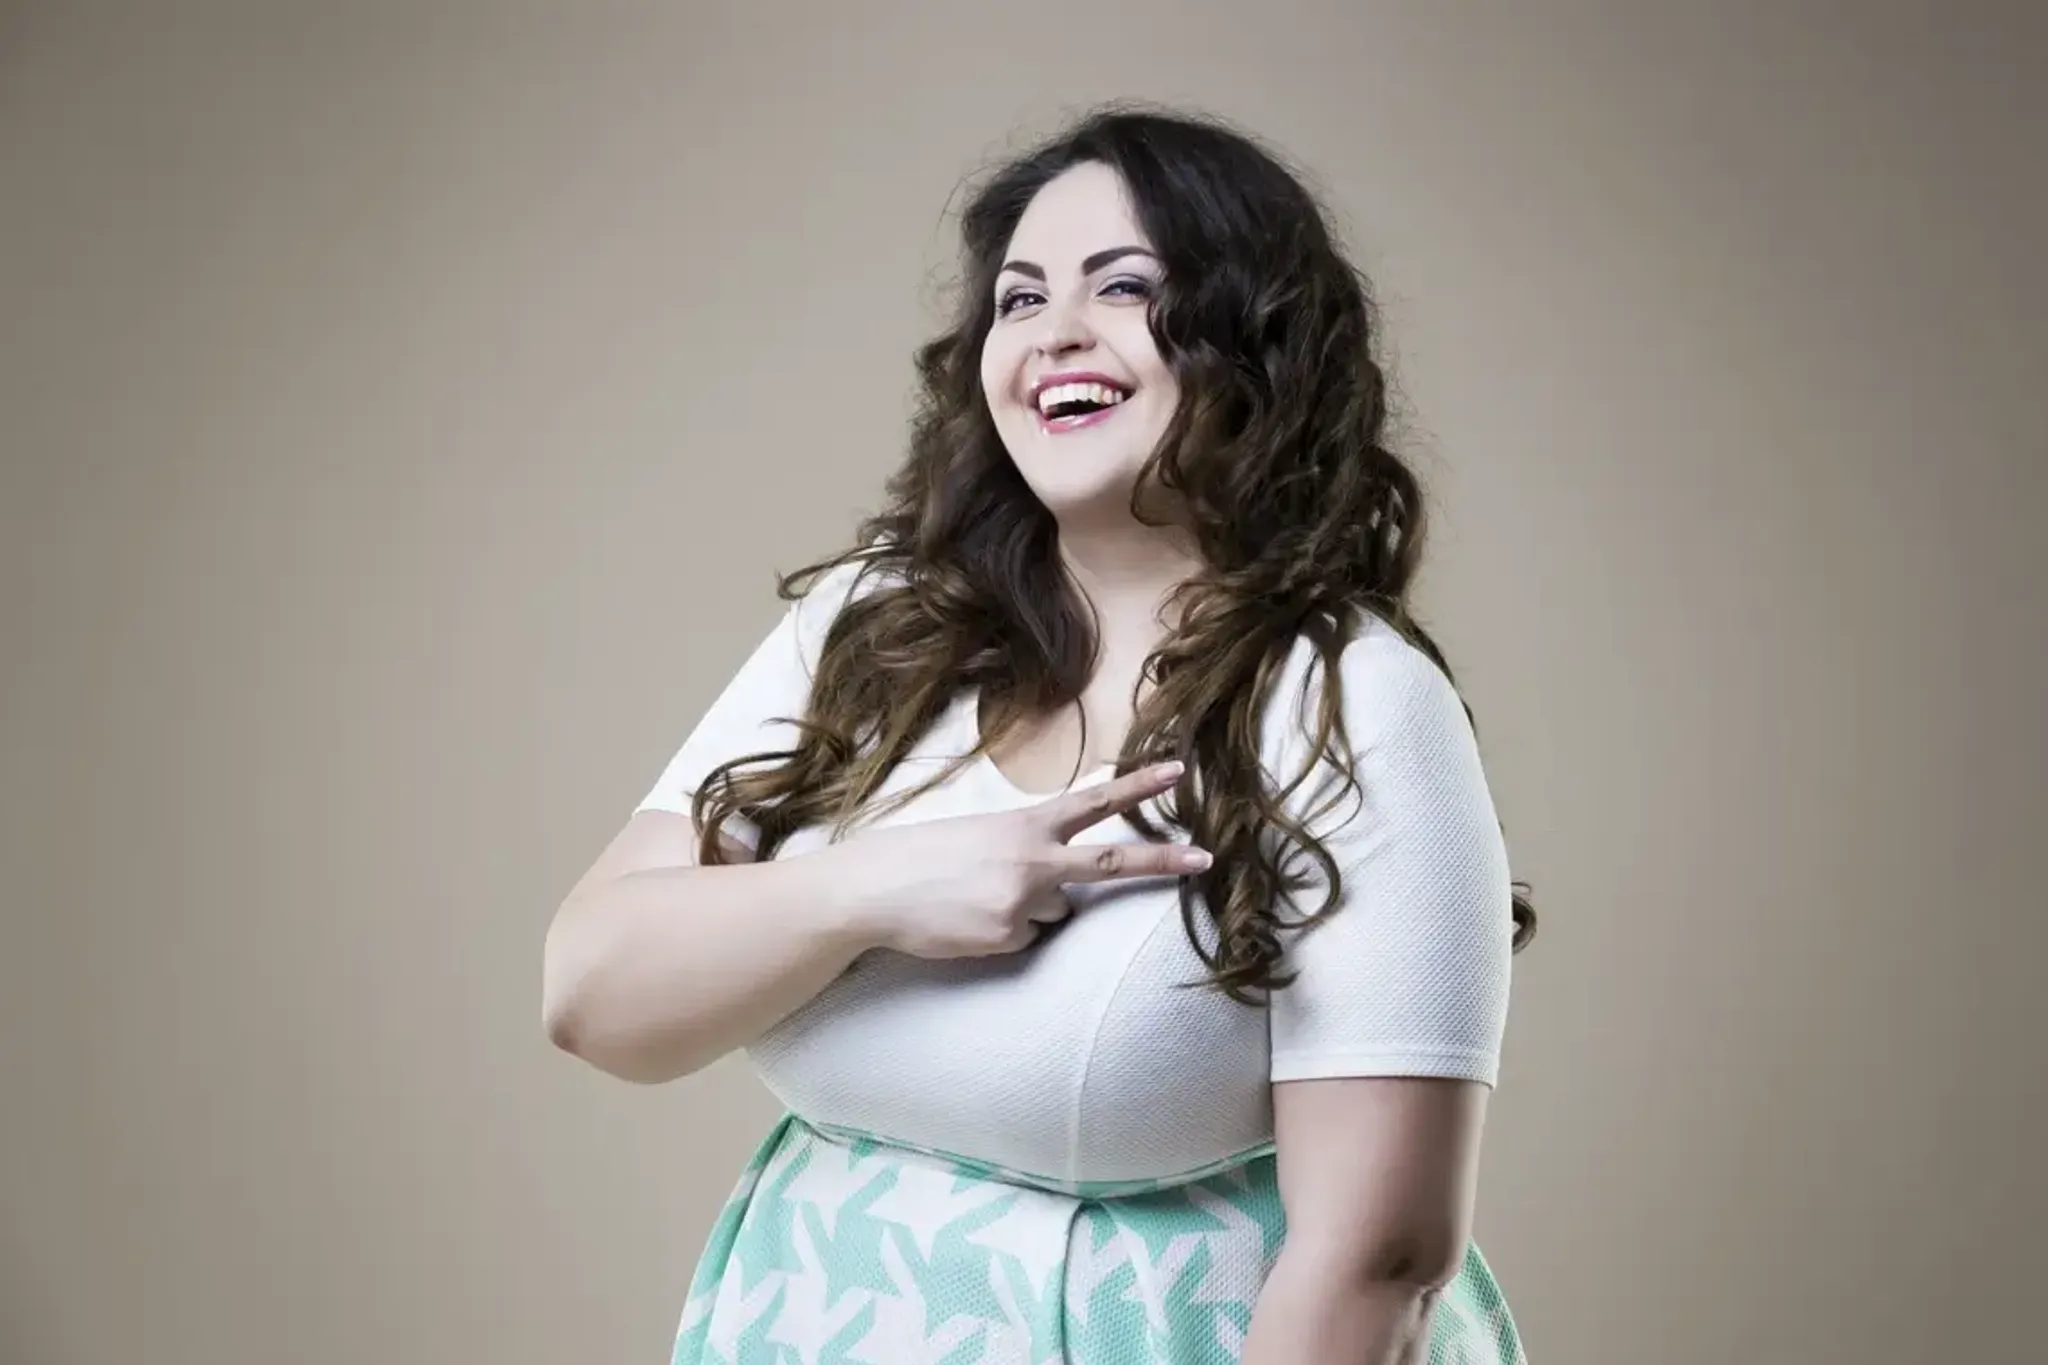 Body Positive Influencers like Ashley Graham, Tess Holliday and Lizzo Inspire Plus-sized Women, According to New Survey